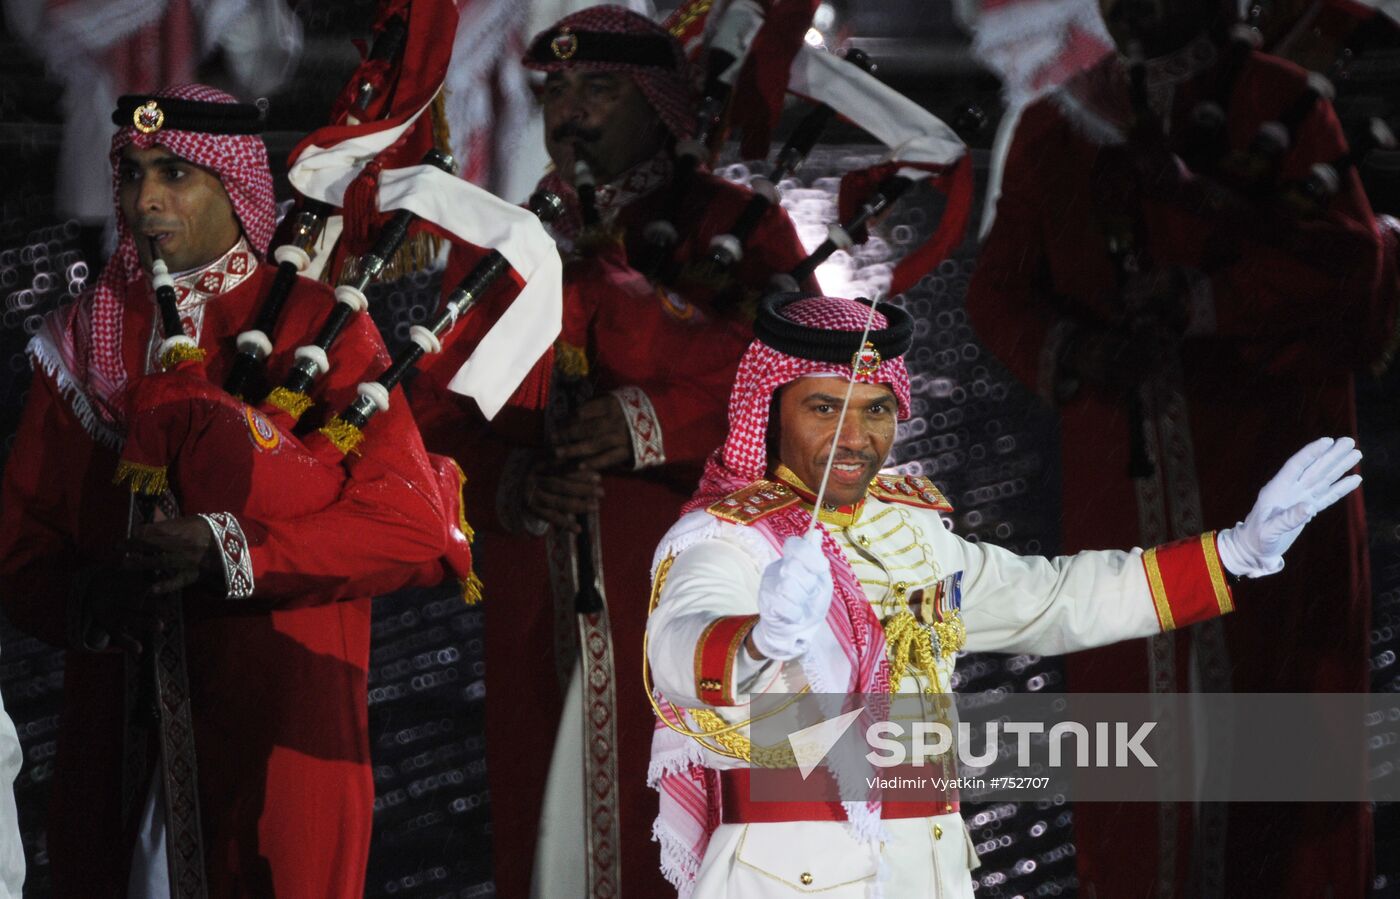 Police Orchestra of Kingdom of Bahrain